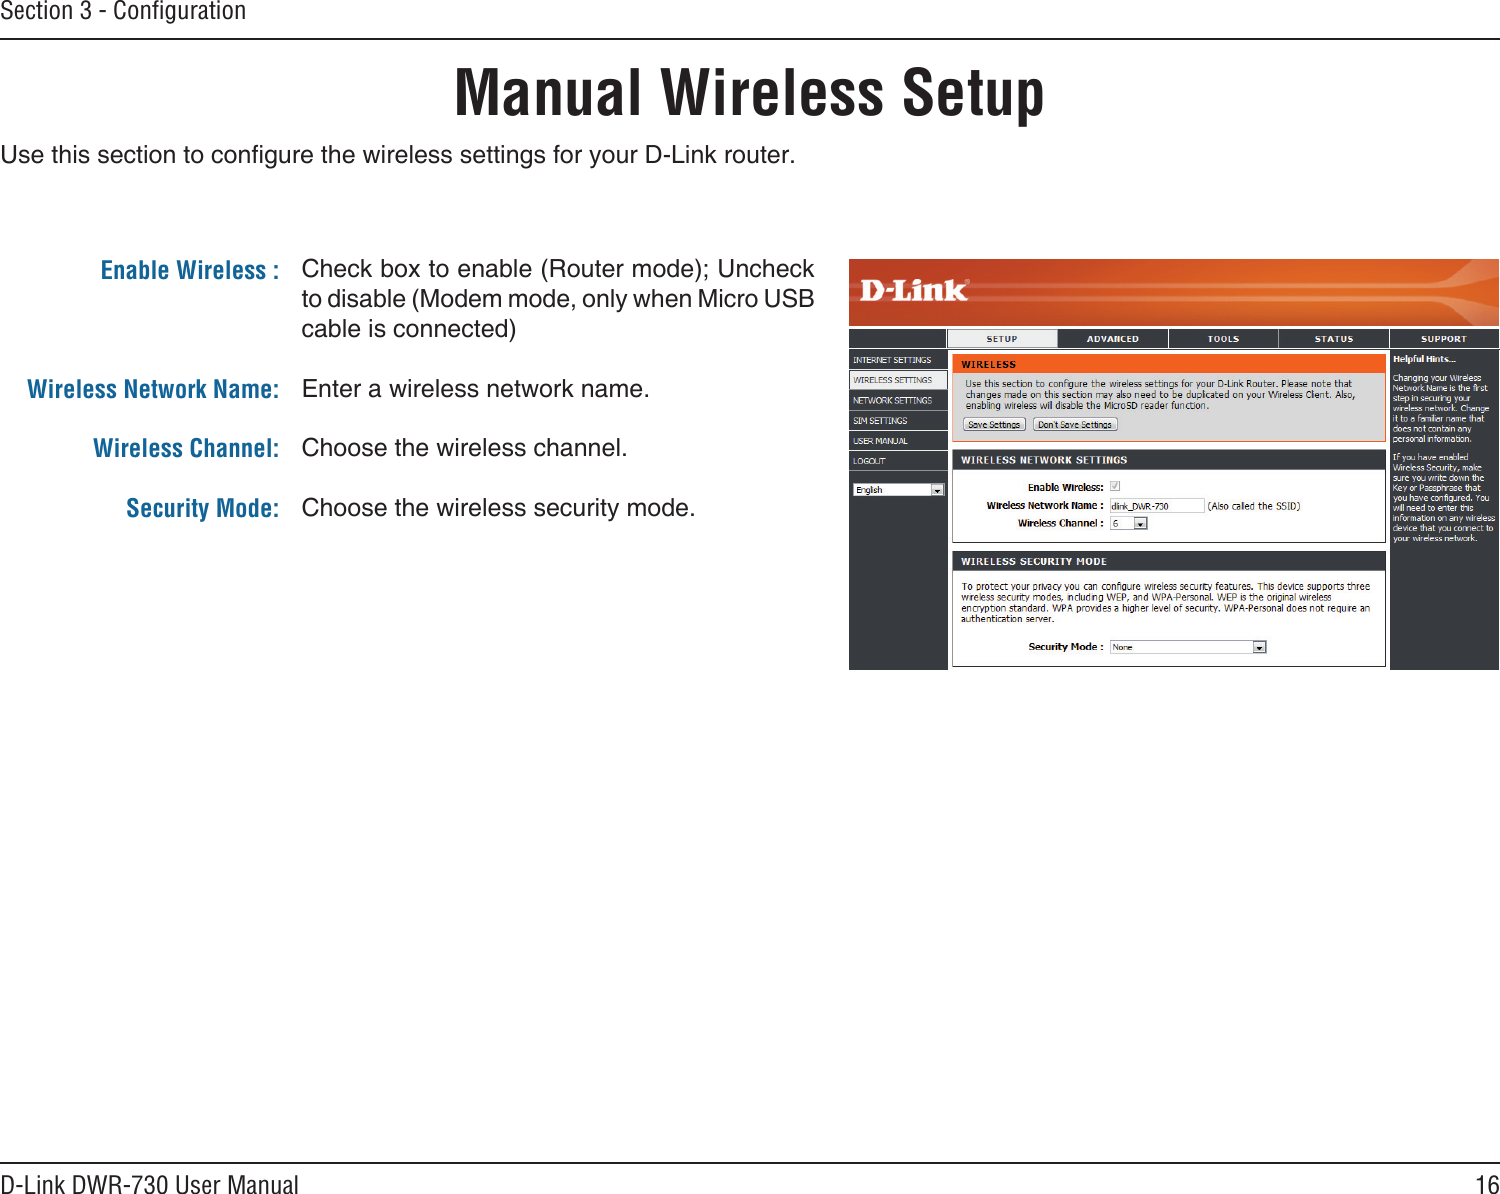 16D-Link DWR-730 User ManualSection 3 - ConﬁgurationManual Wireless SetupEnable Wireless :Wireless Network Name:Wireless Channel:Security Mode: